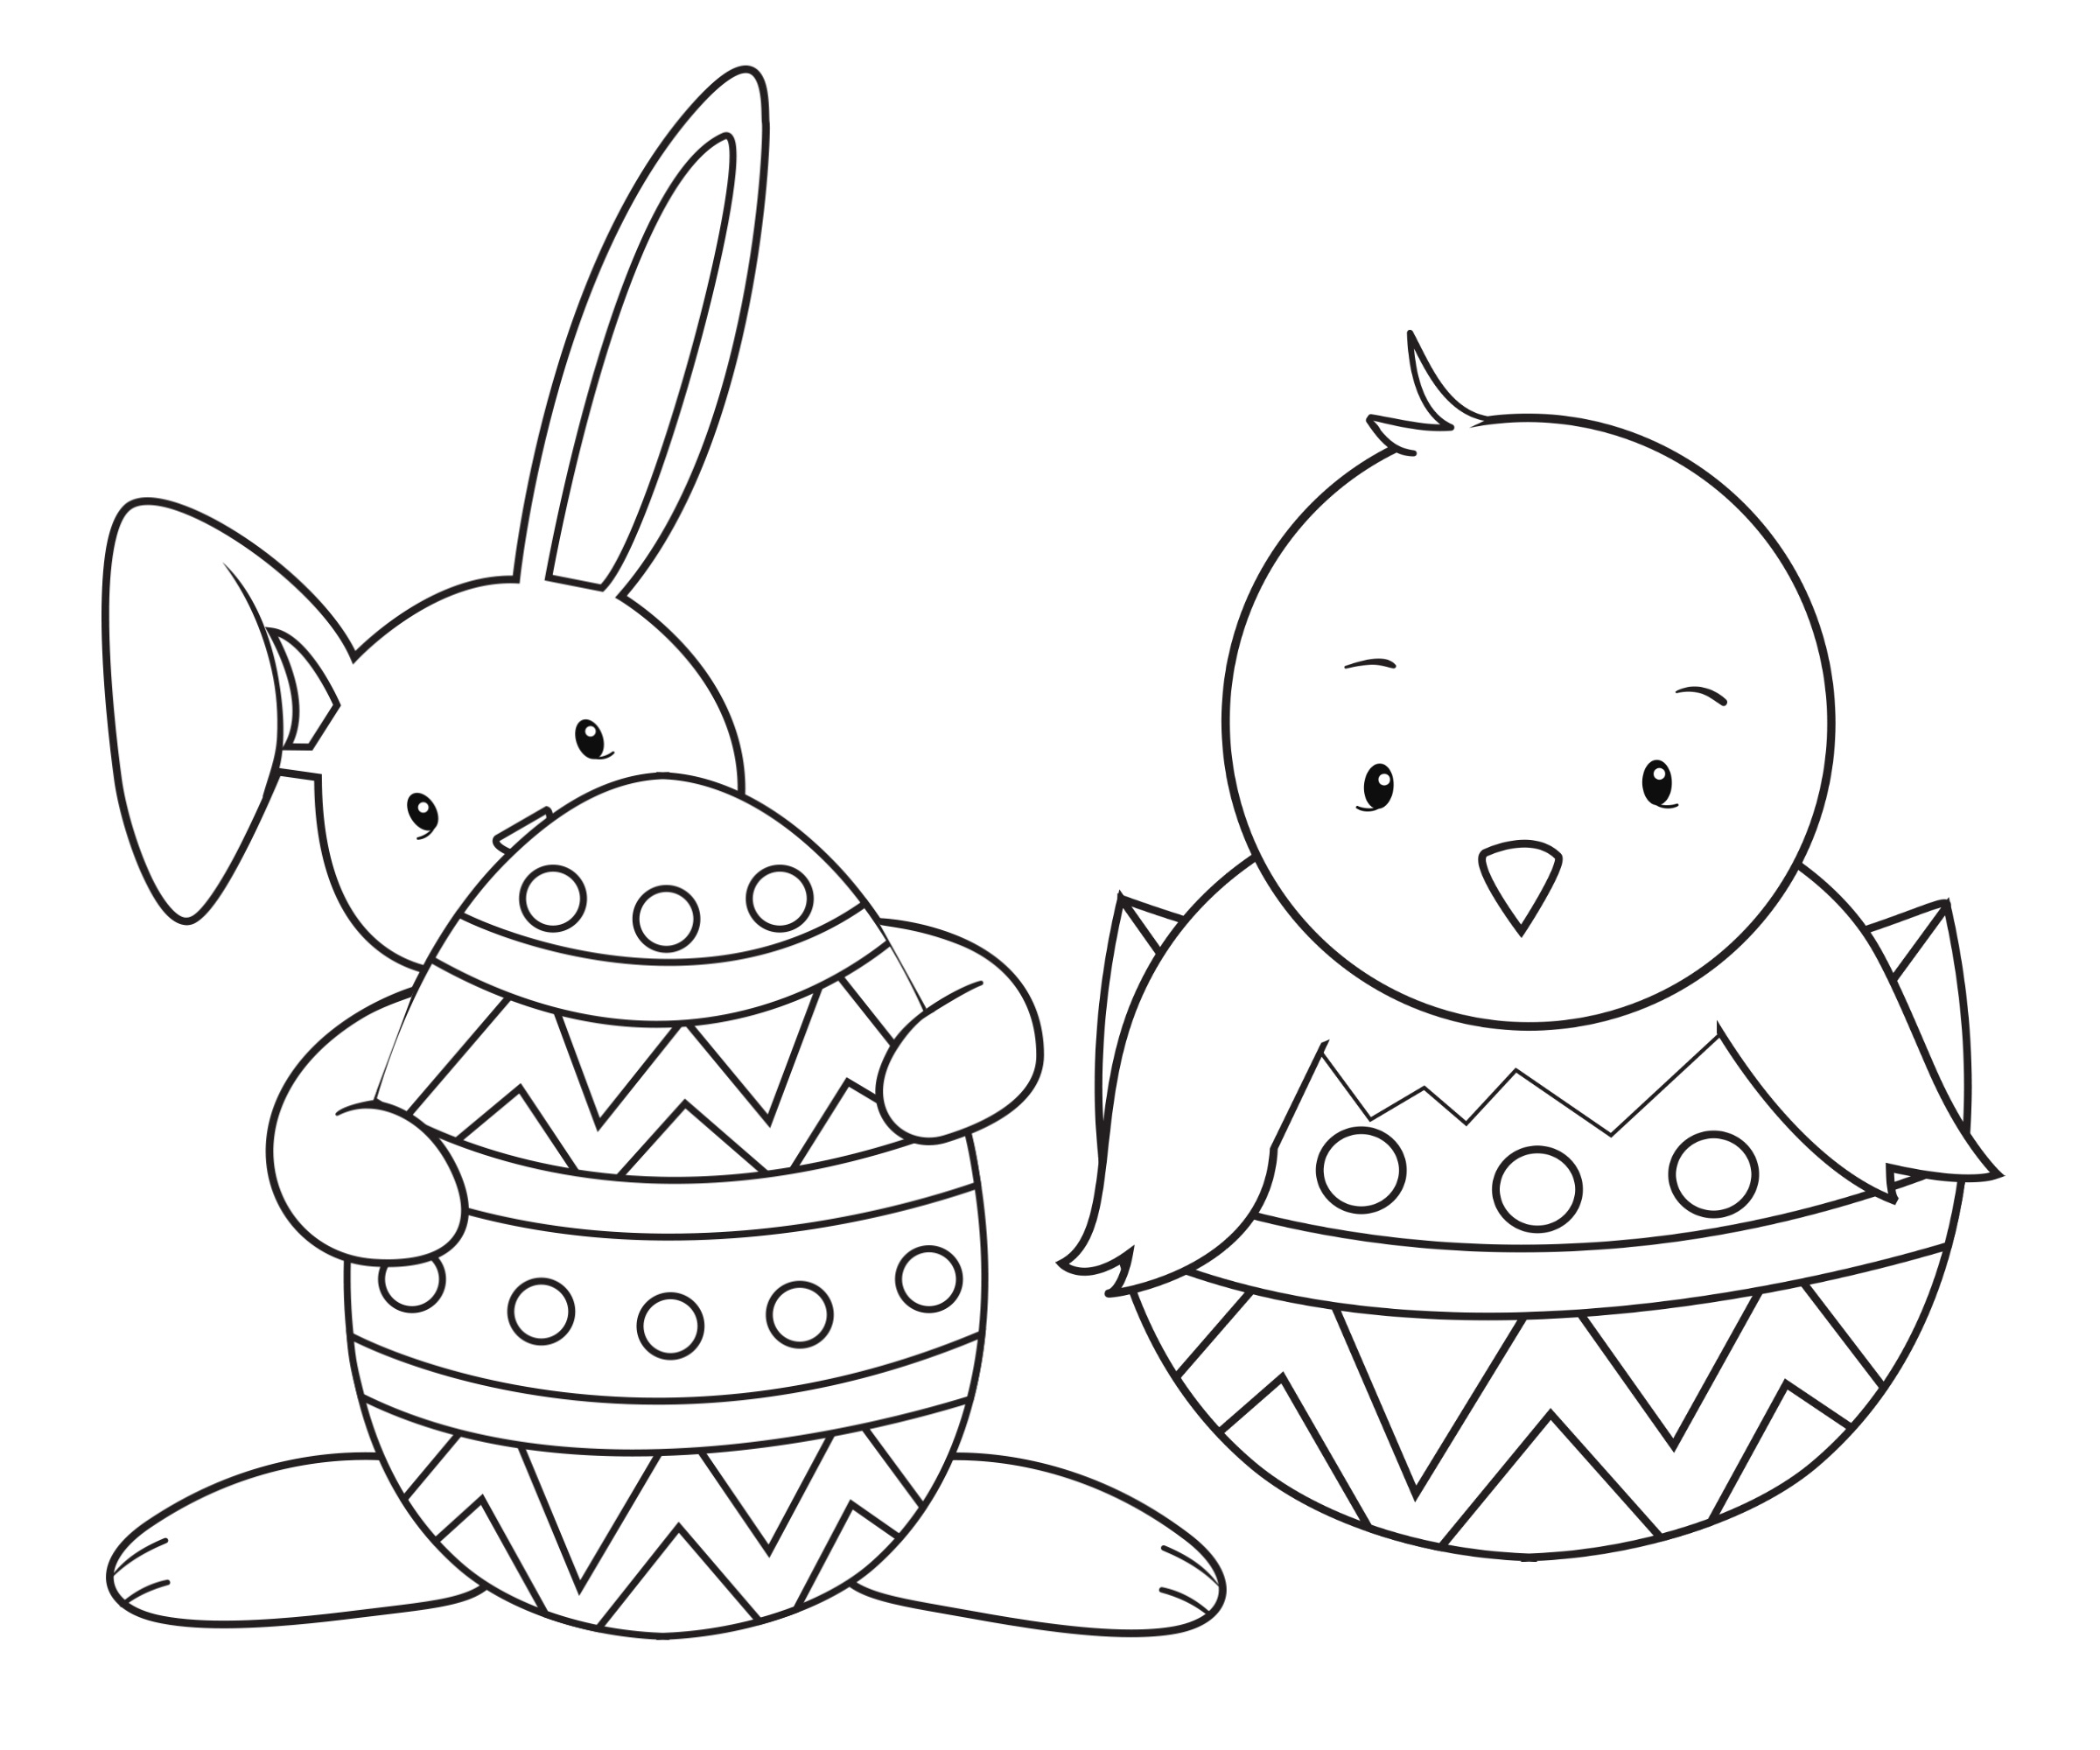 Easter Coloring Pages For Kids - Crazy Little Projects - Free Printable Easter Pages